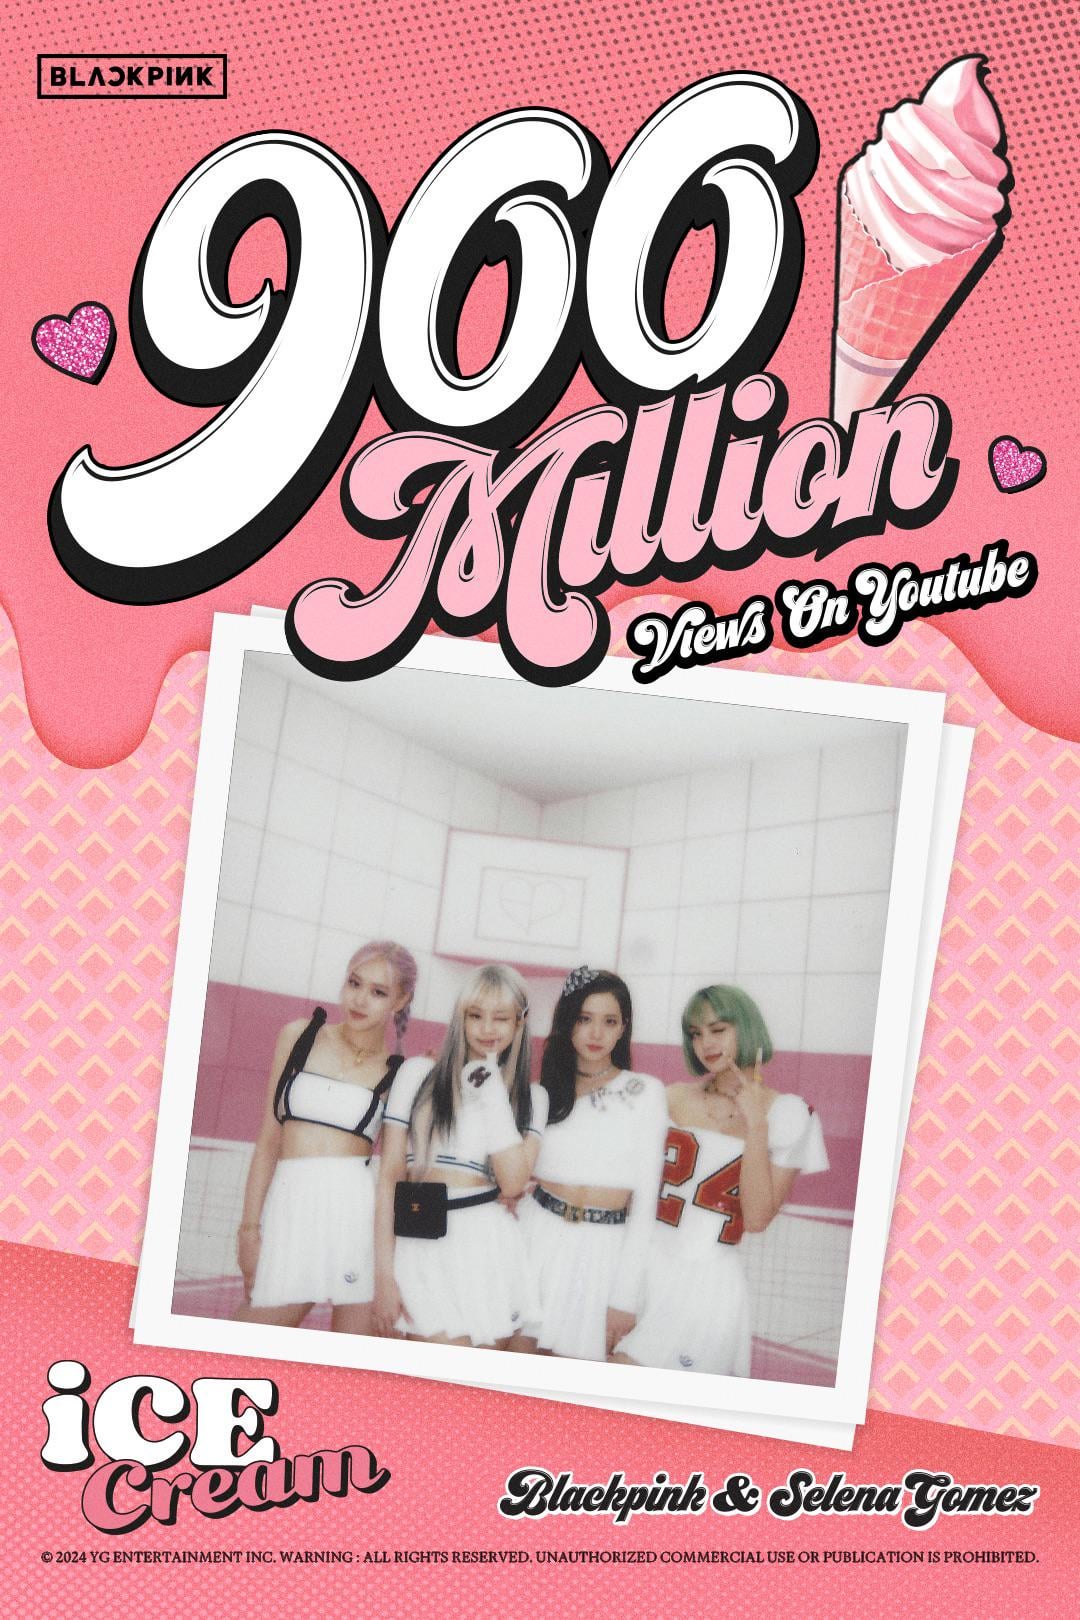 240407 BLACKPINK - ‘Ice Cream (with Selena Gomez)’ M/V hits 900 MILLION VIEWS on Youtube! [Official Poster]